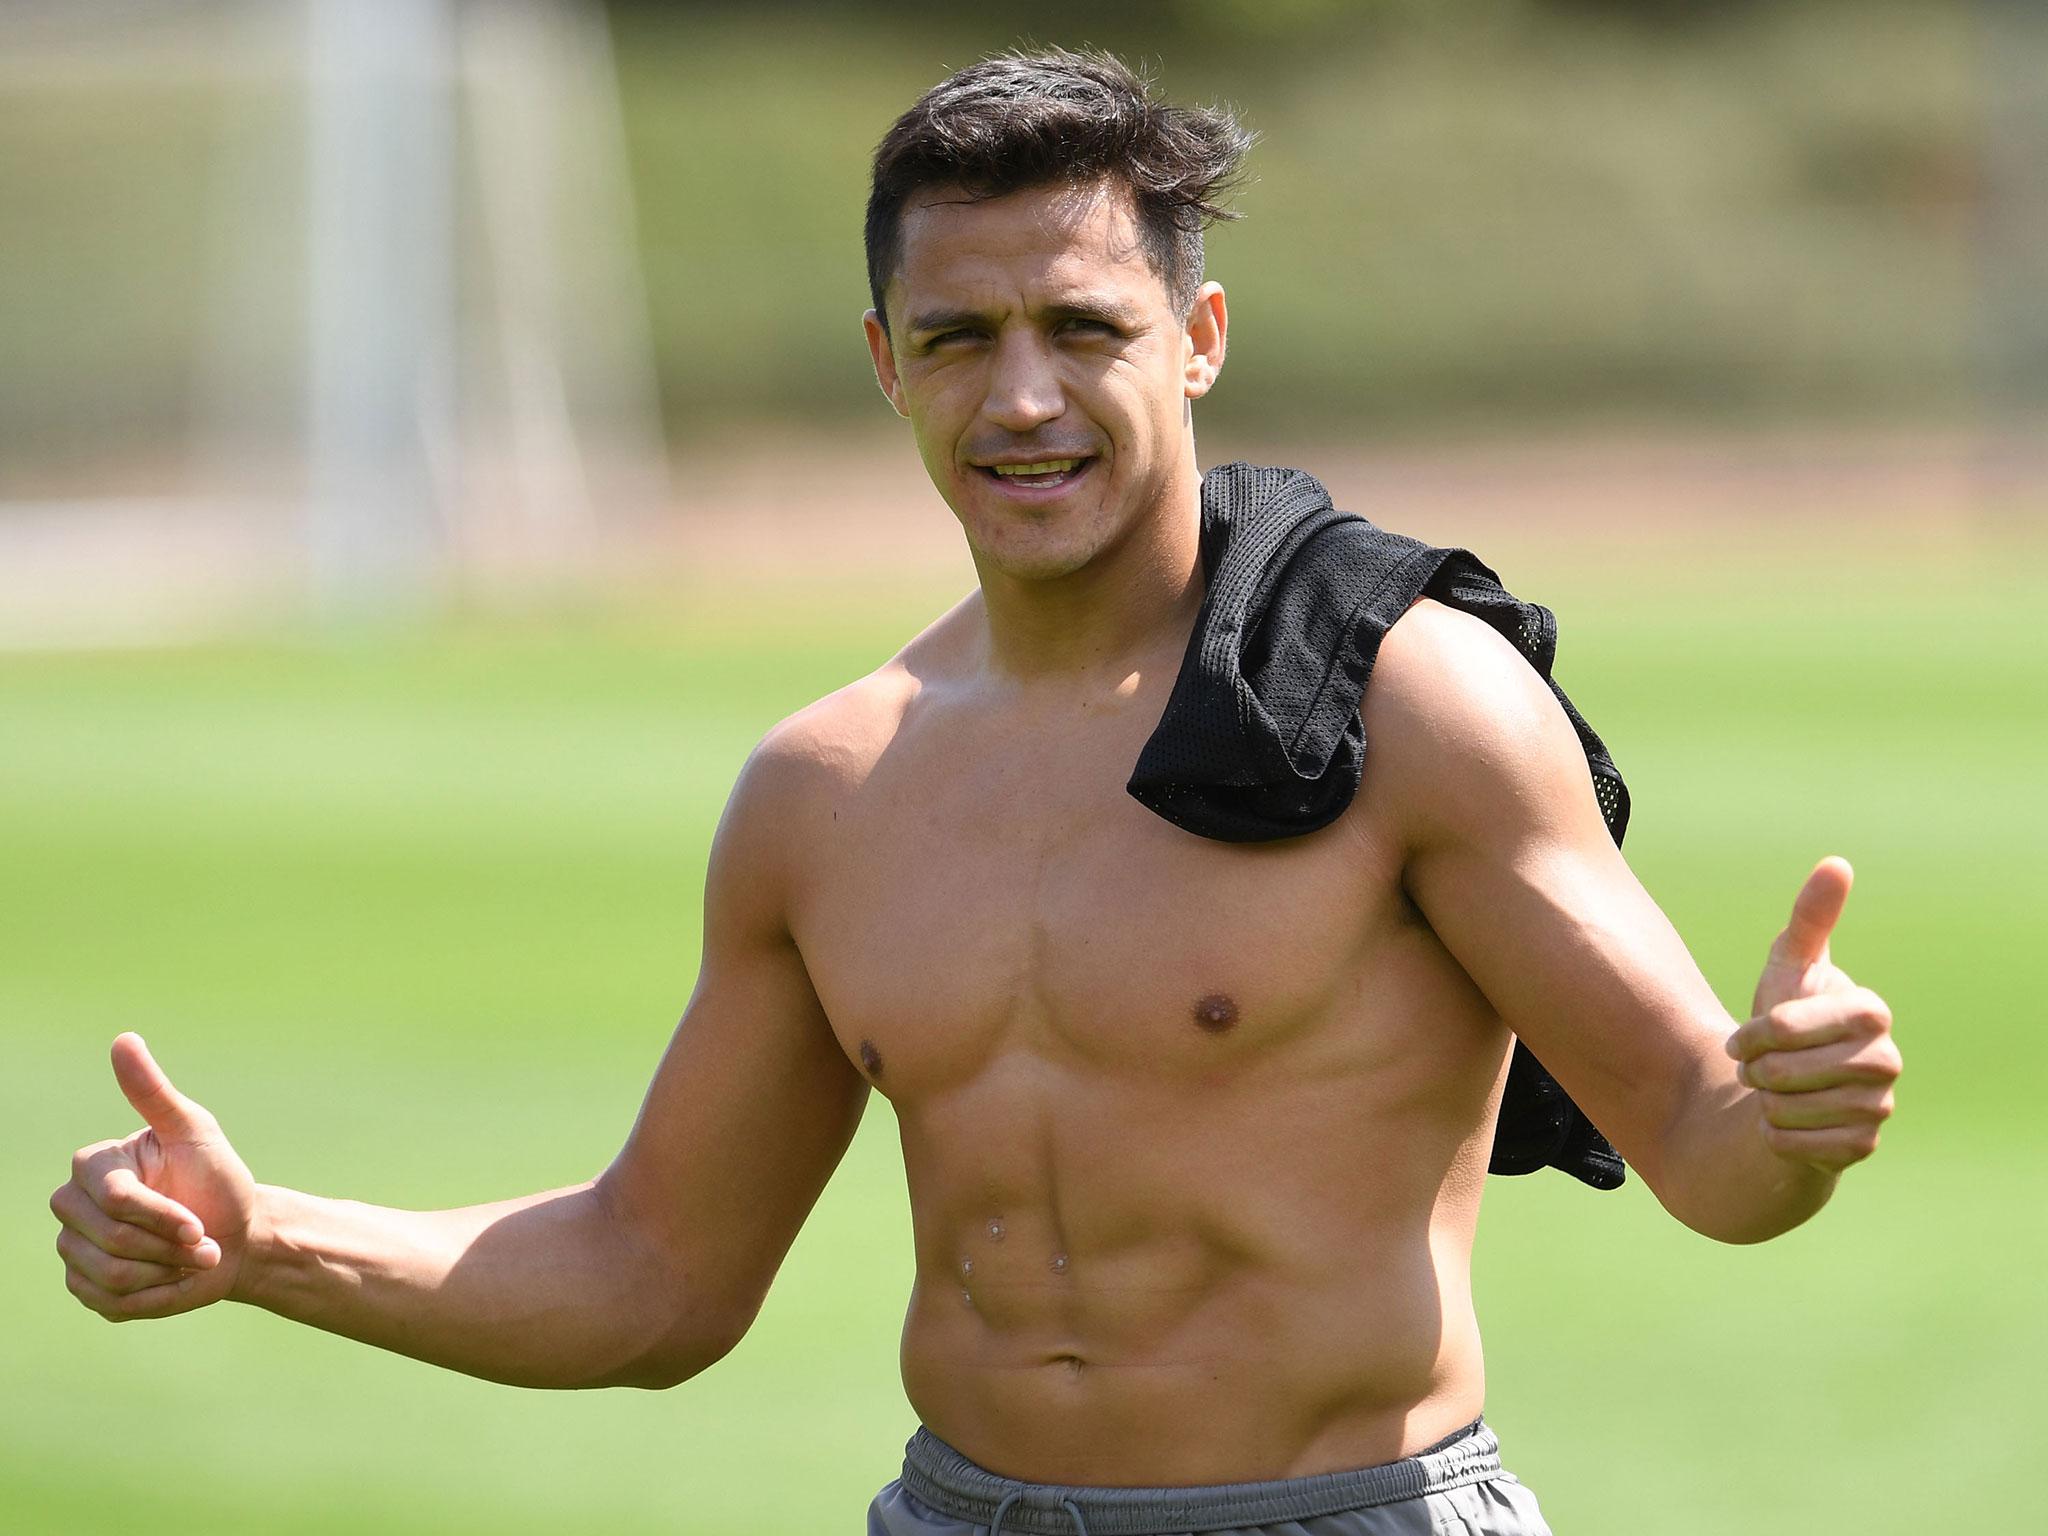 Sanchez is a target for Bayern Munich, Chelsea and Manchester City